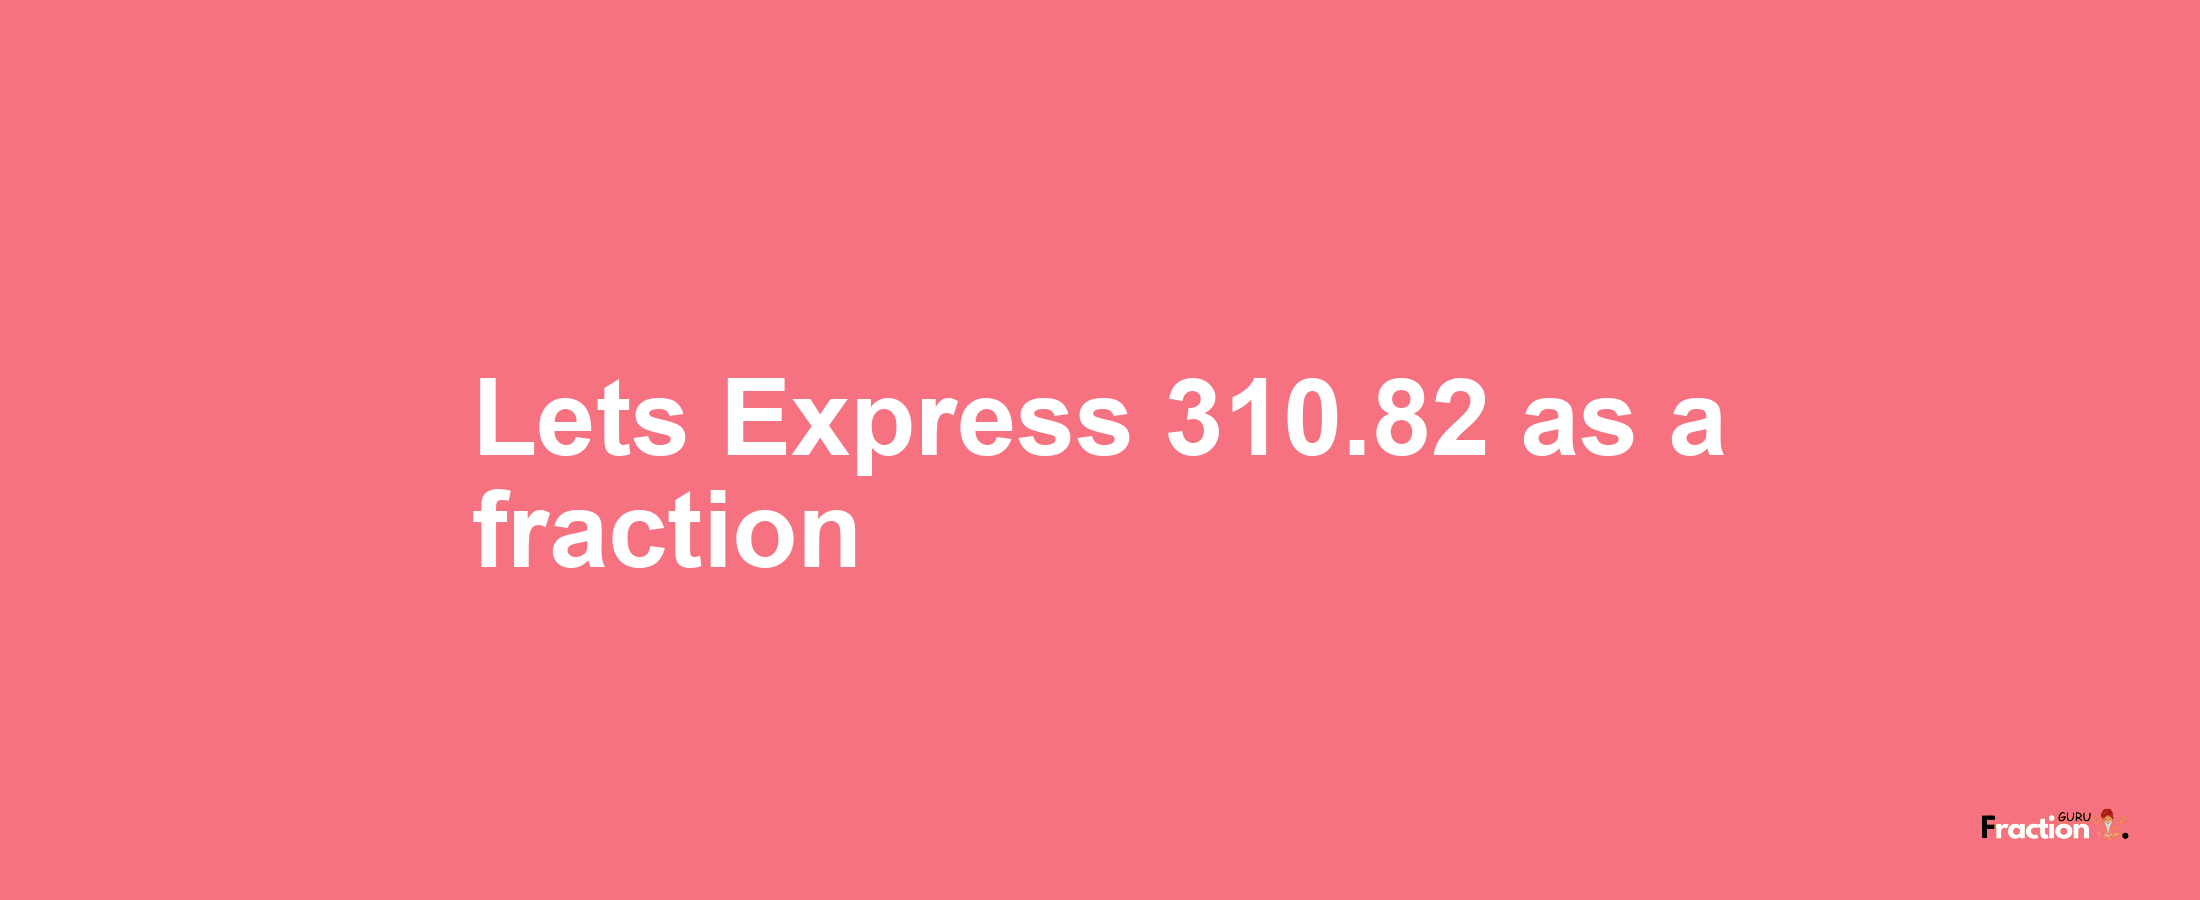 Lets Express 310.82 as afraction